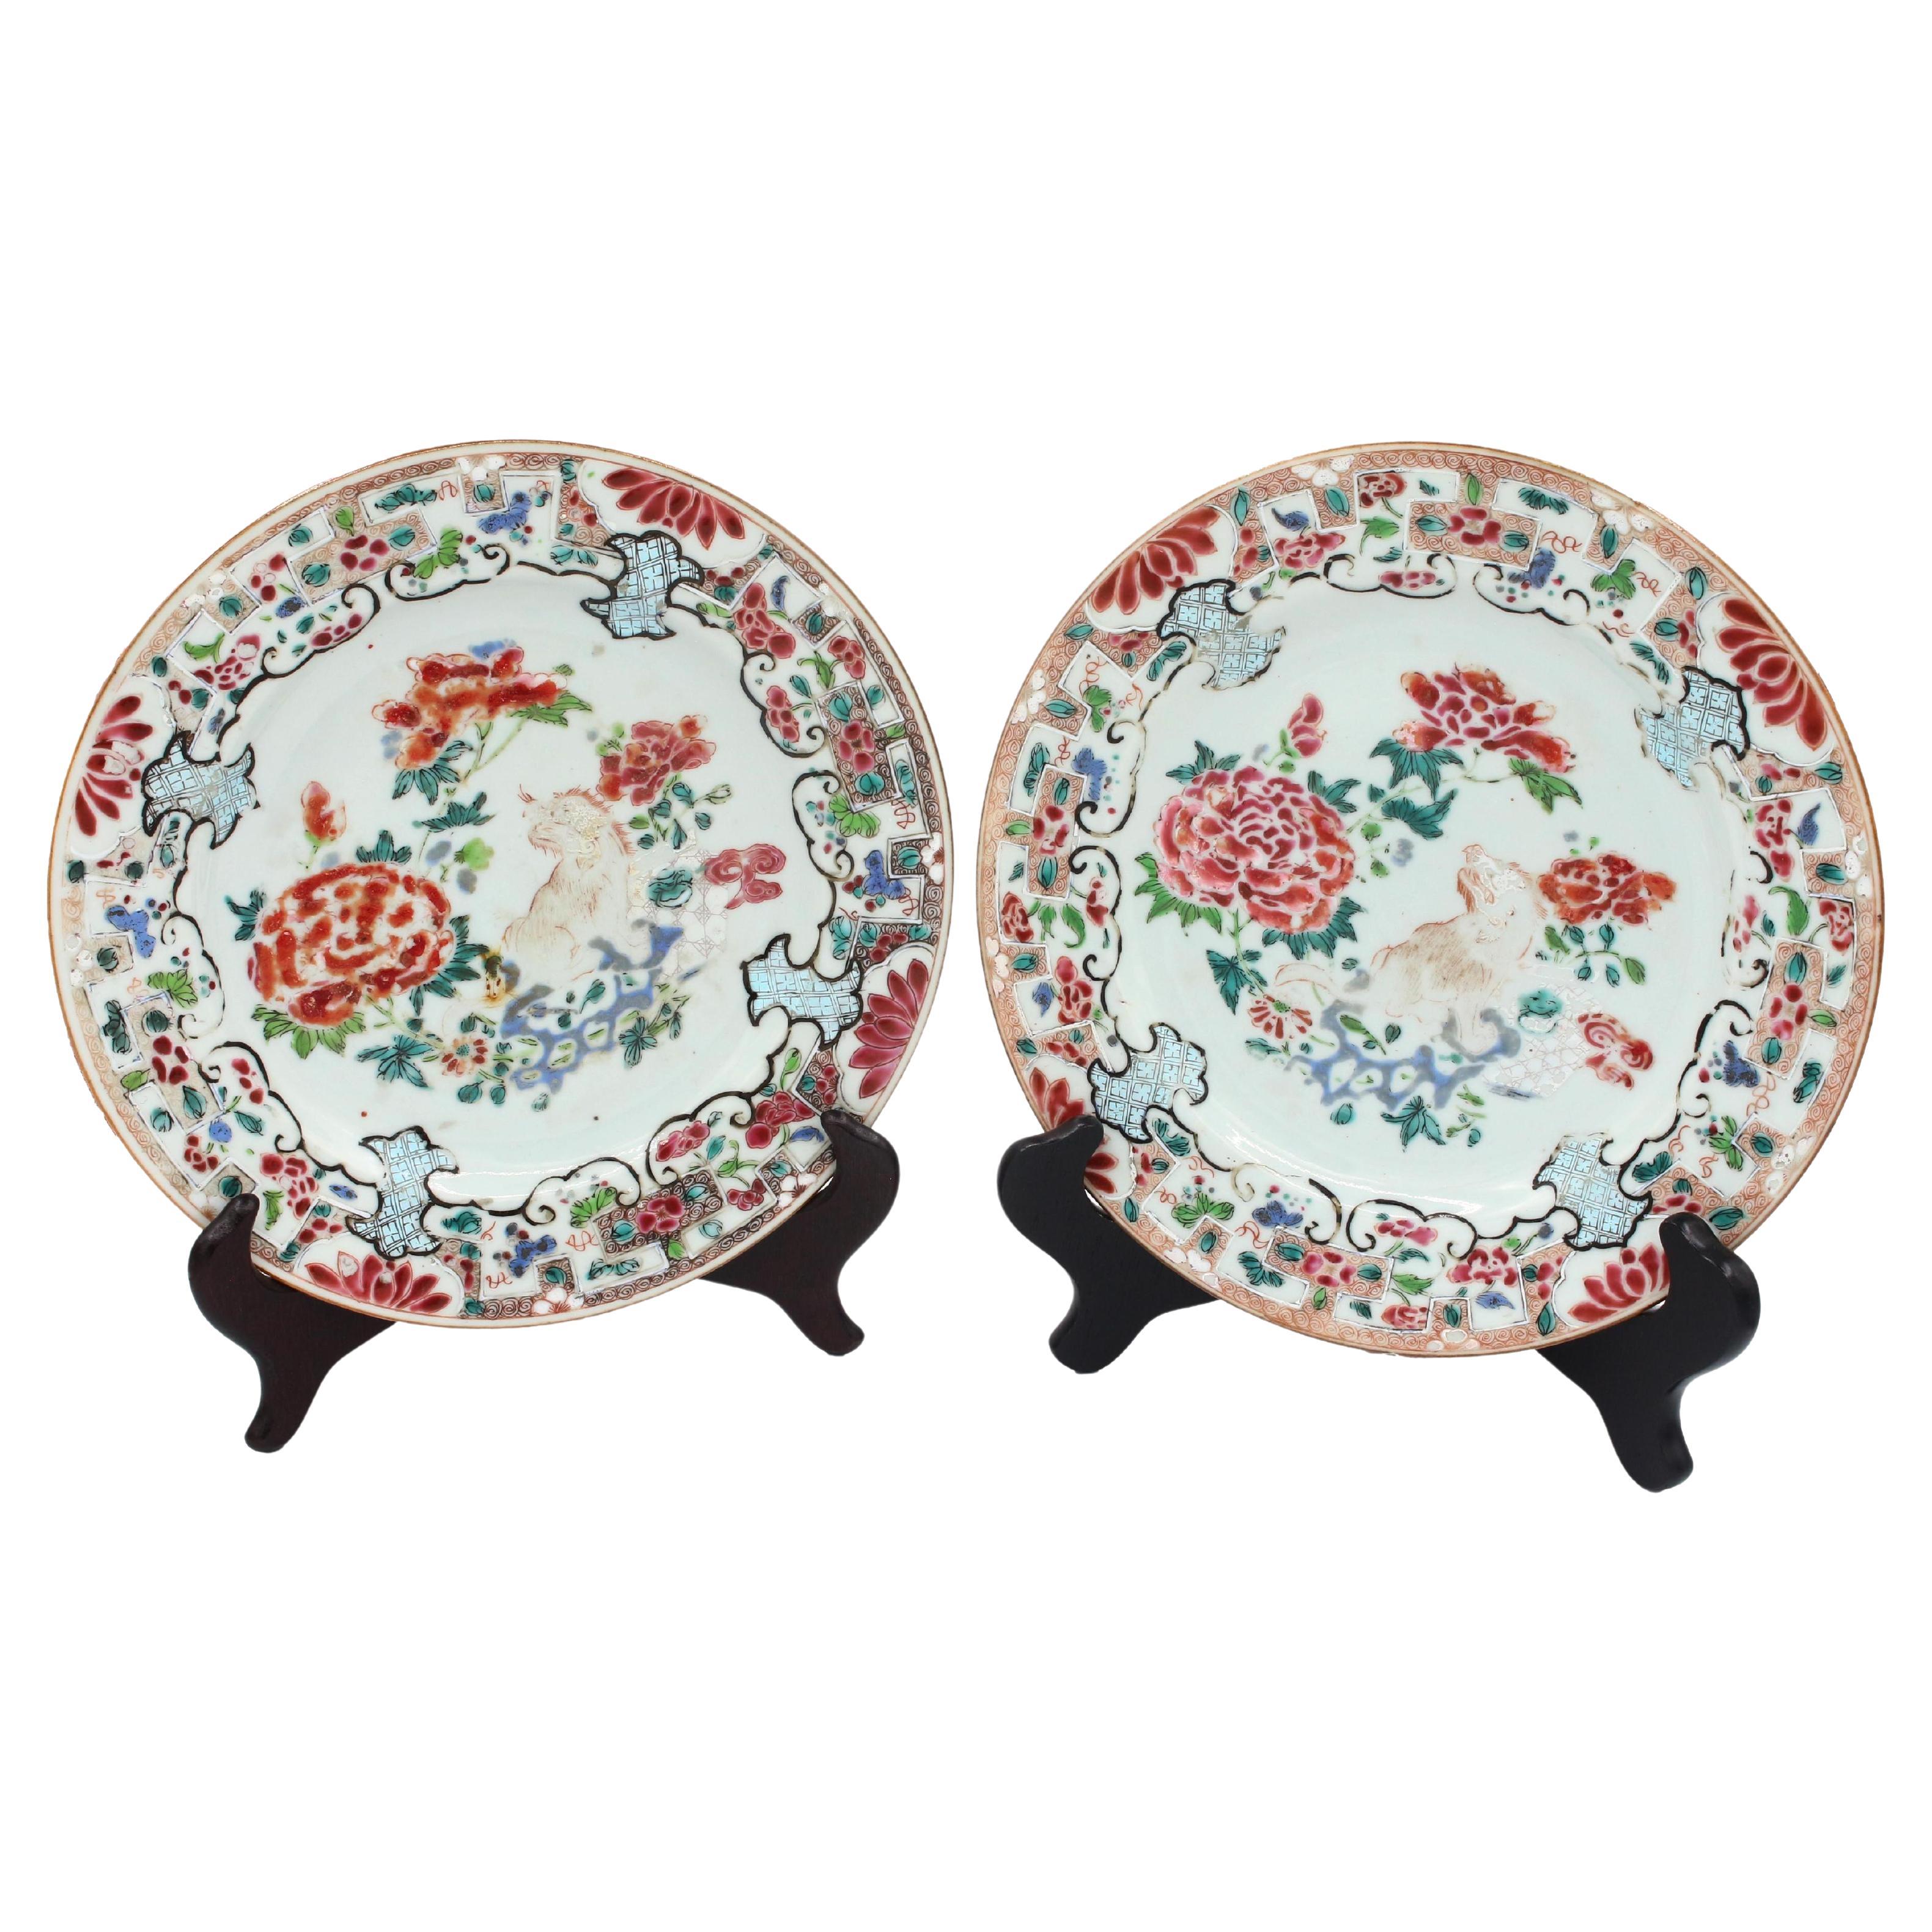 A Pair of Yongzheng Period Famille Rose Plates, Chinese, 1722-1735